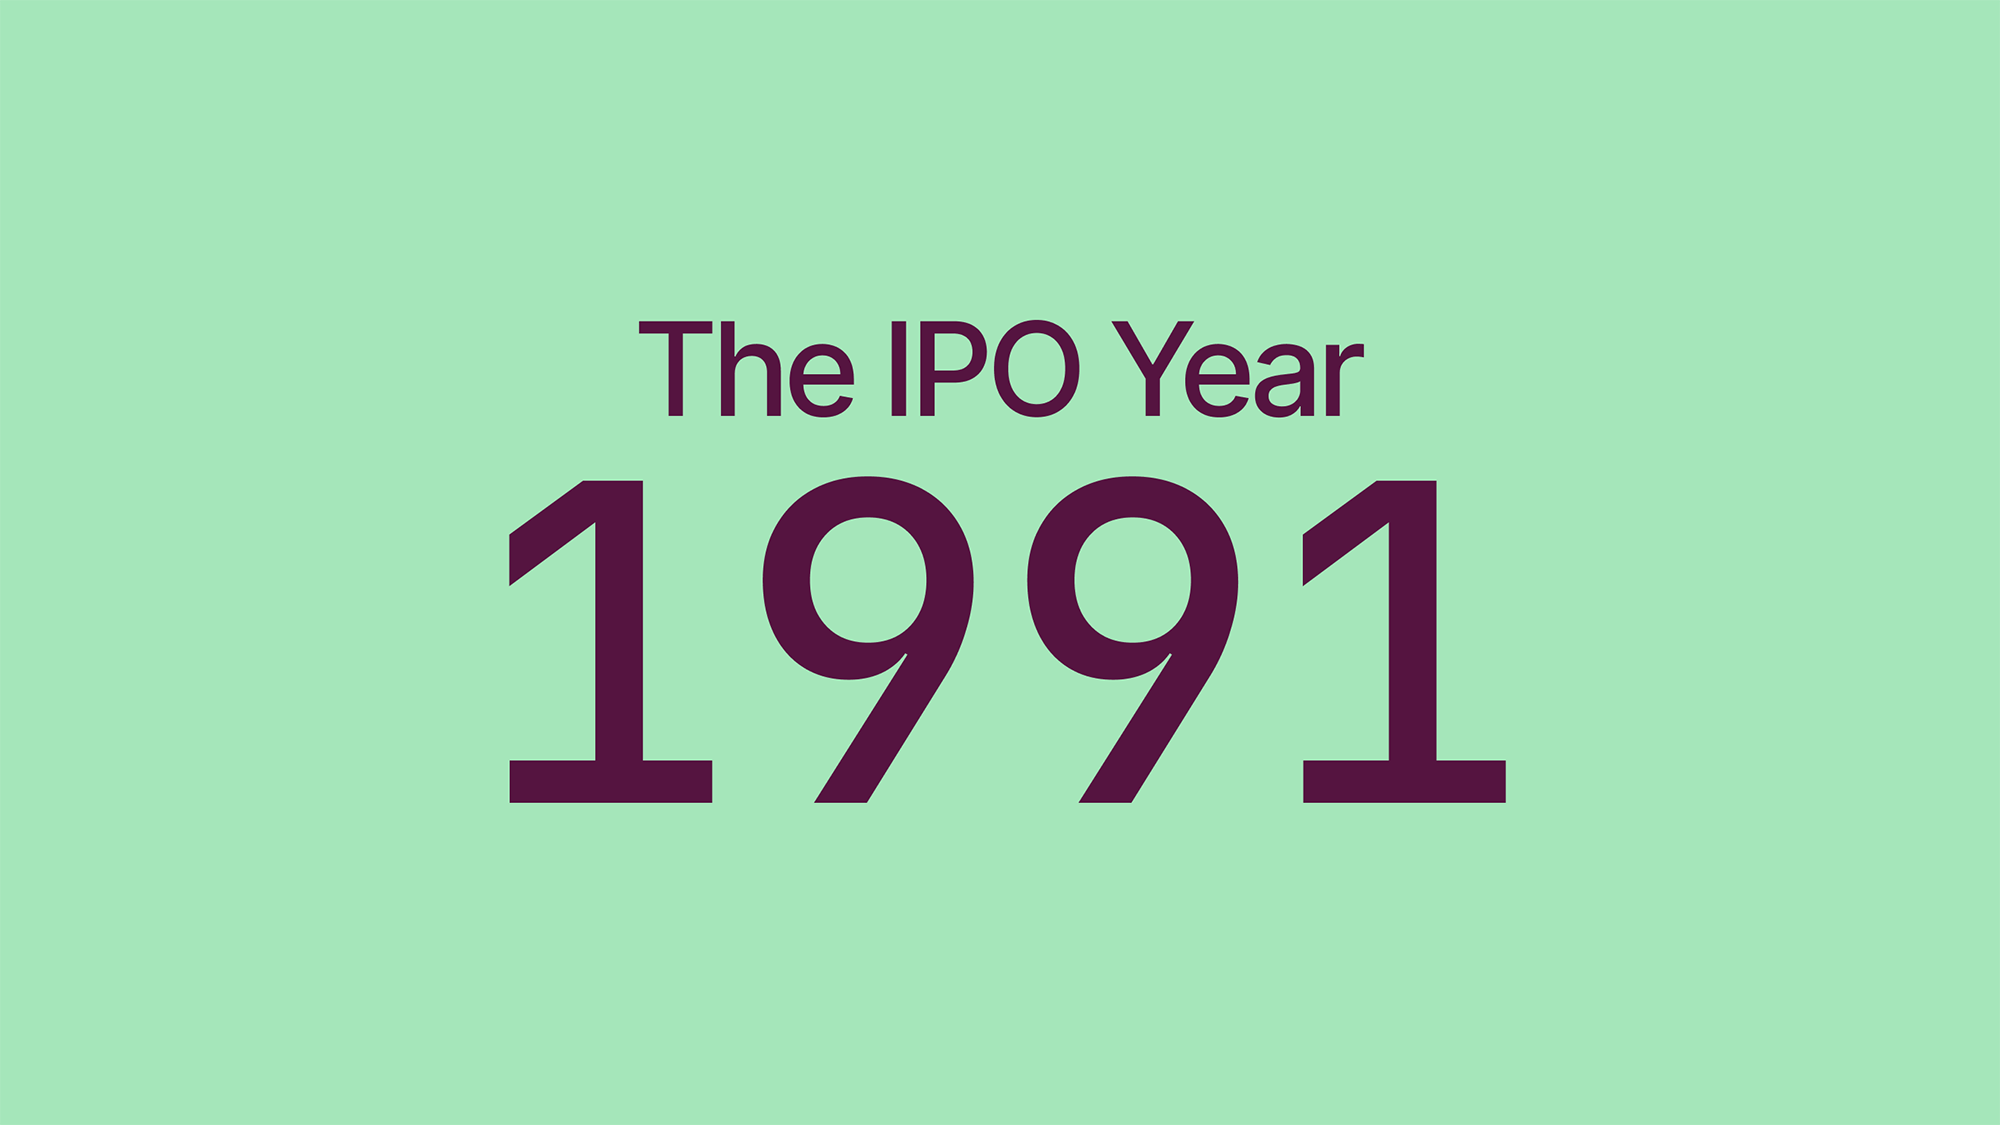 The IPO Year: 1991